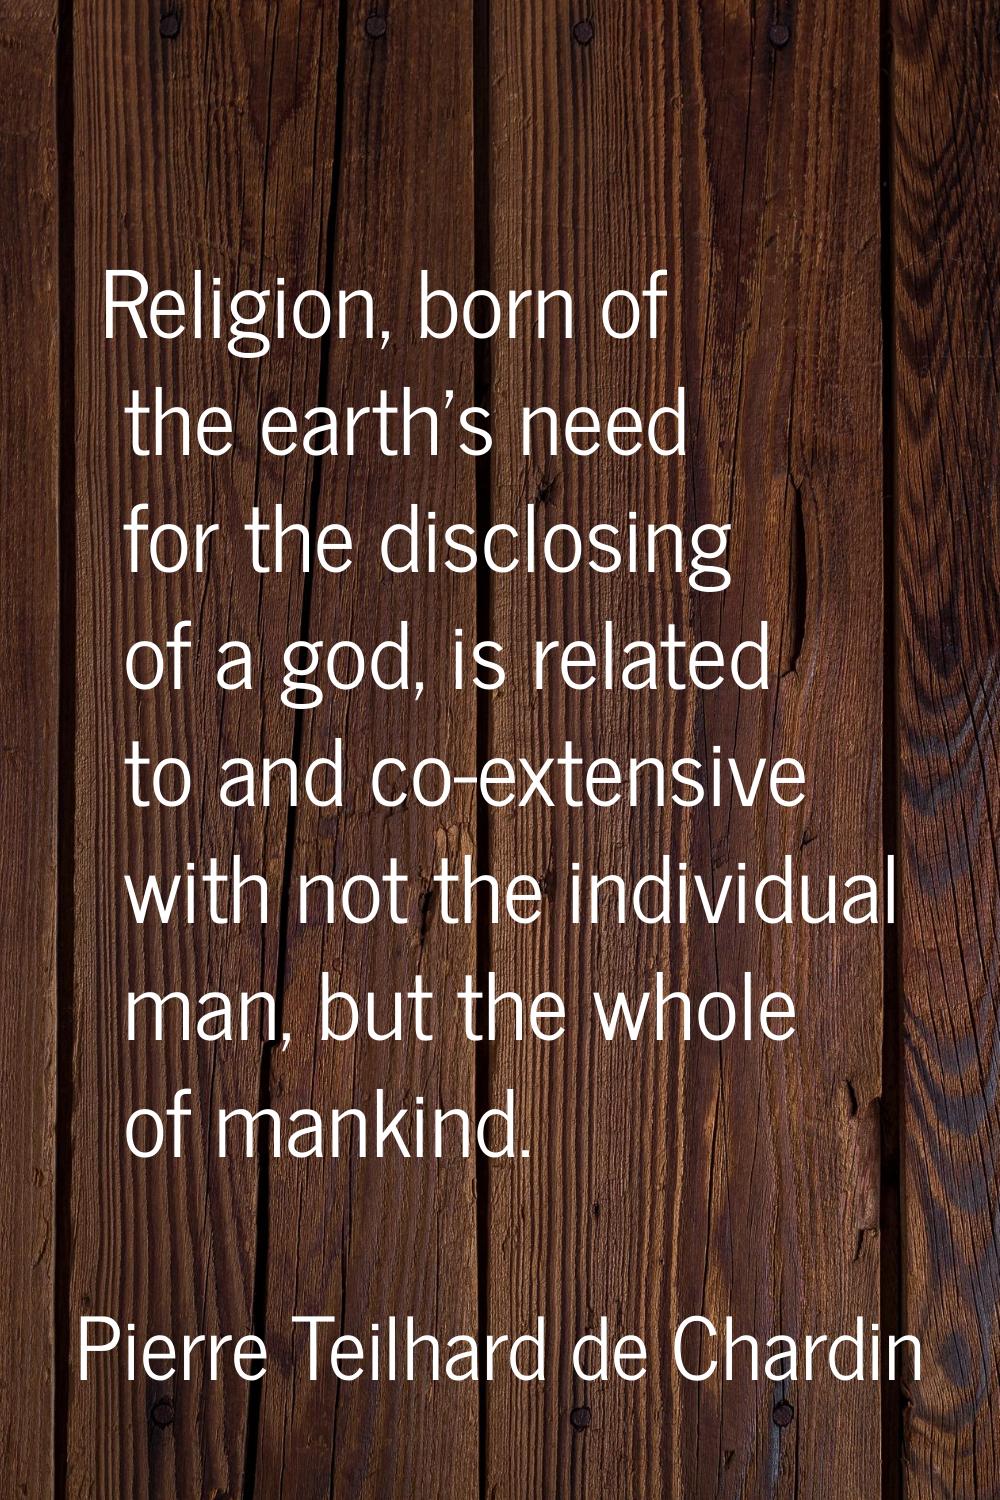 Religion, born of the earth's need for the disclosing of a god, is related to and co-extensive with